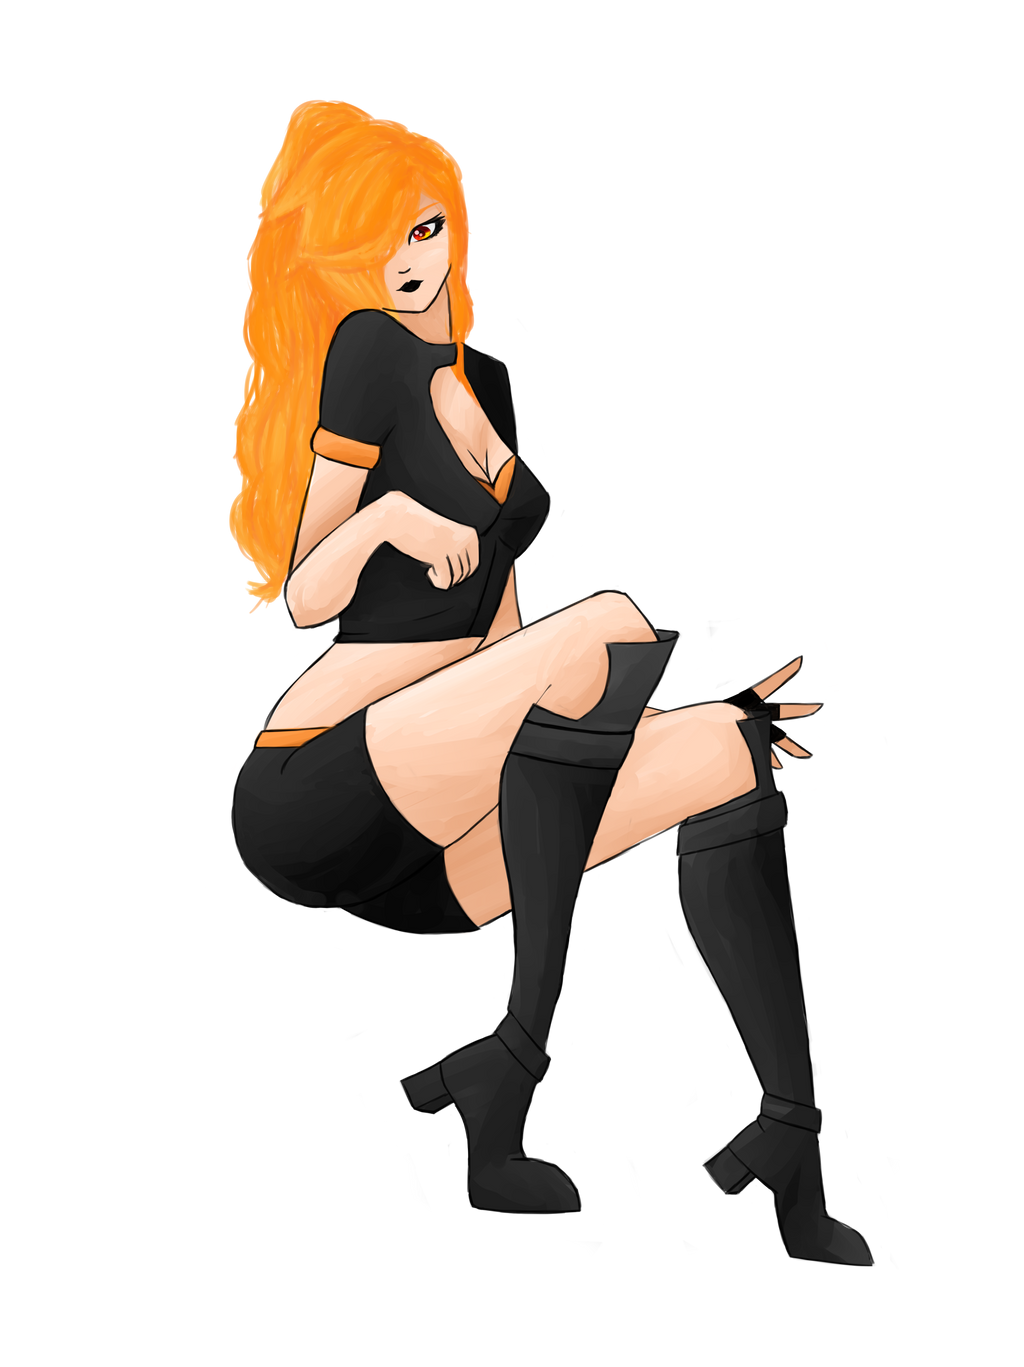 juuniji_hoshi_does_a_sit_for_her_english_showcase_by_universe_juice-d9tiv9b.png